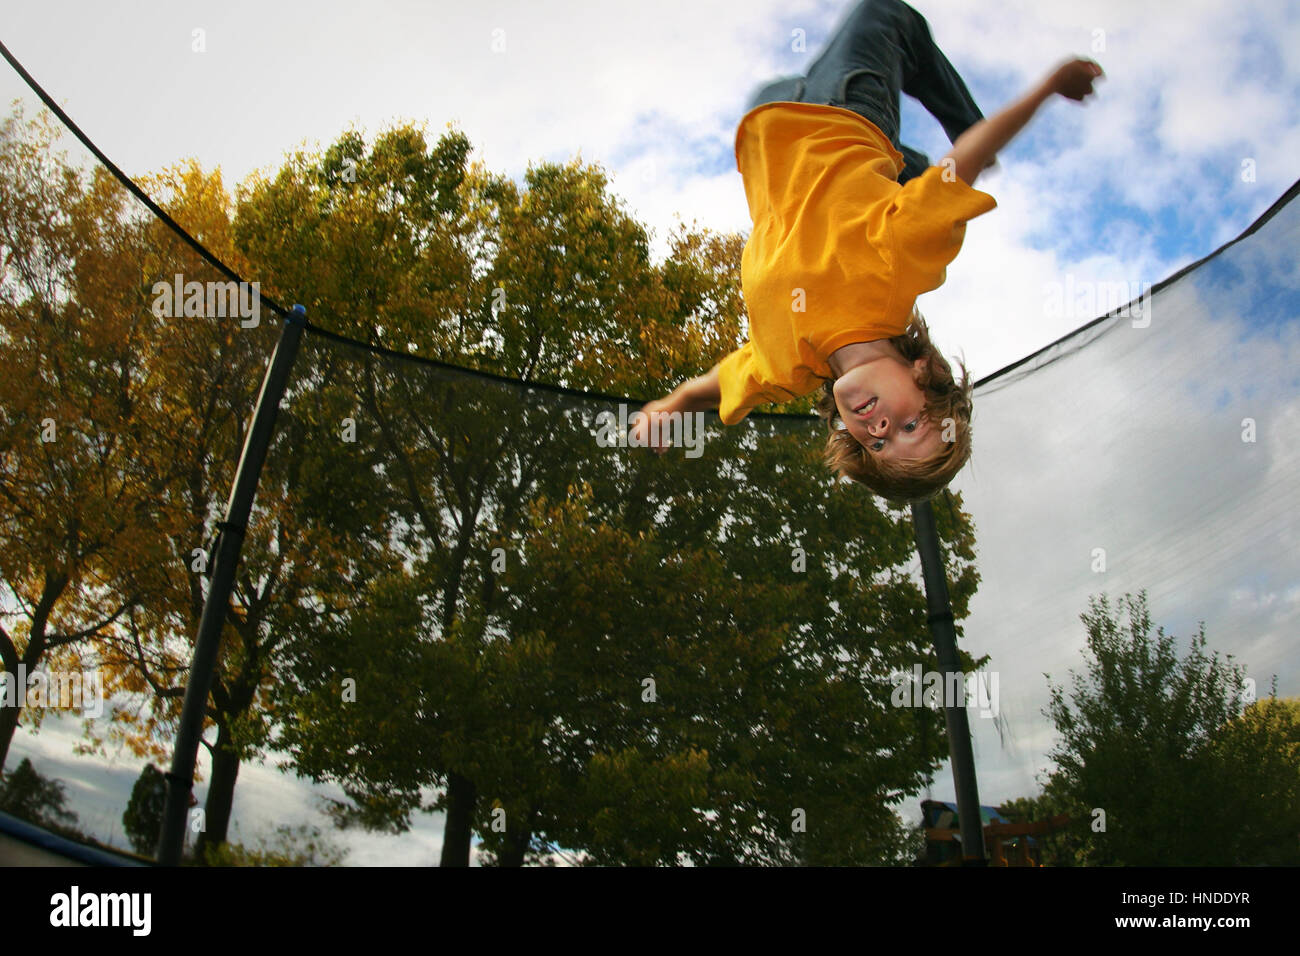 Young boy does a flip on trampoline Stock Photo - Alamy